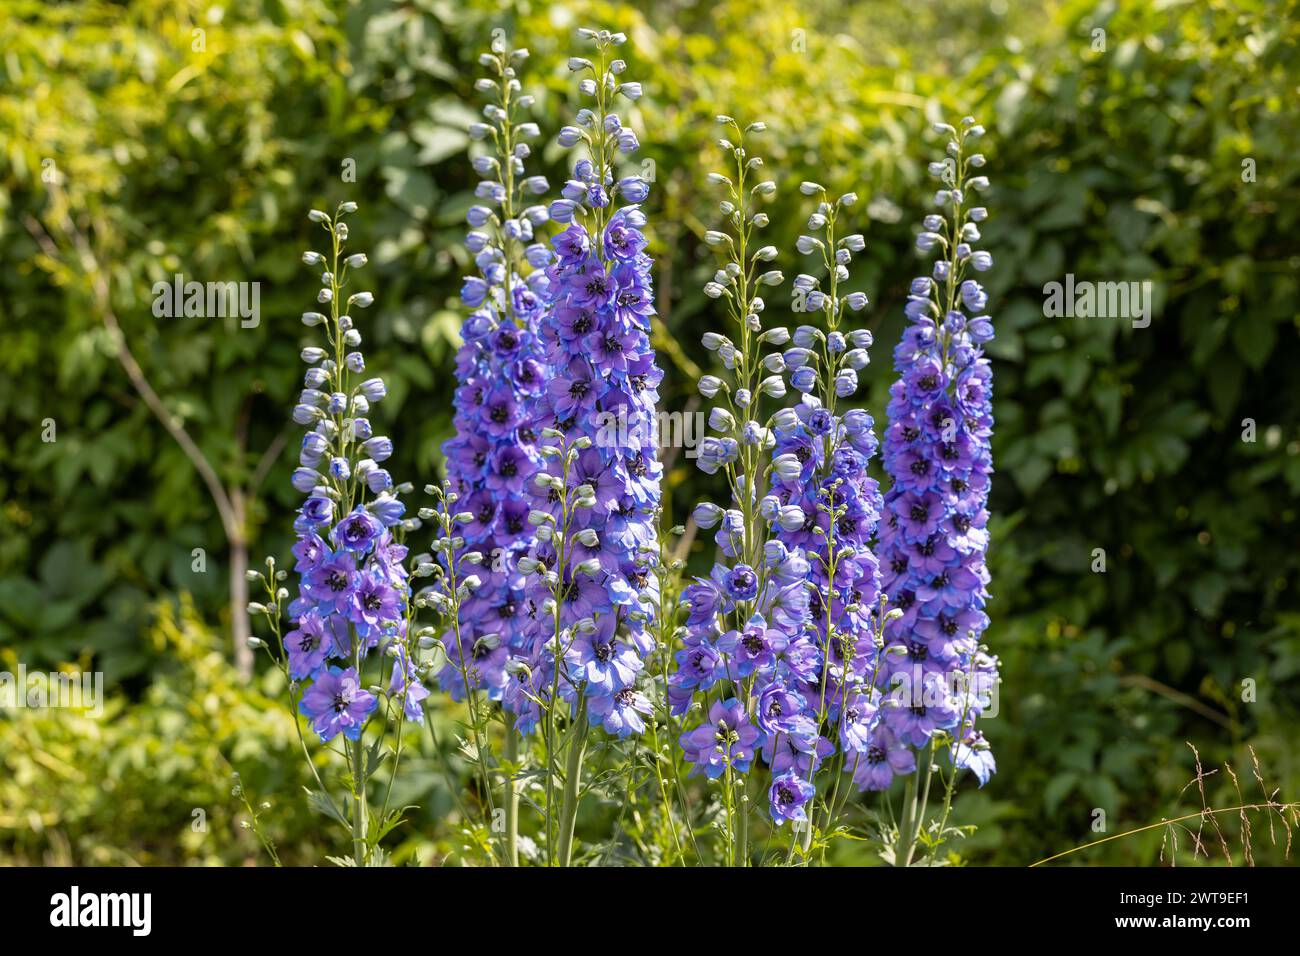 Blue delphinium flower as nice natural background Stock Photo